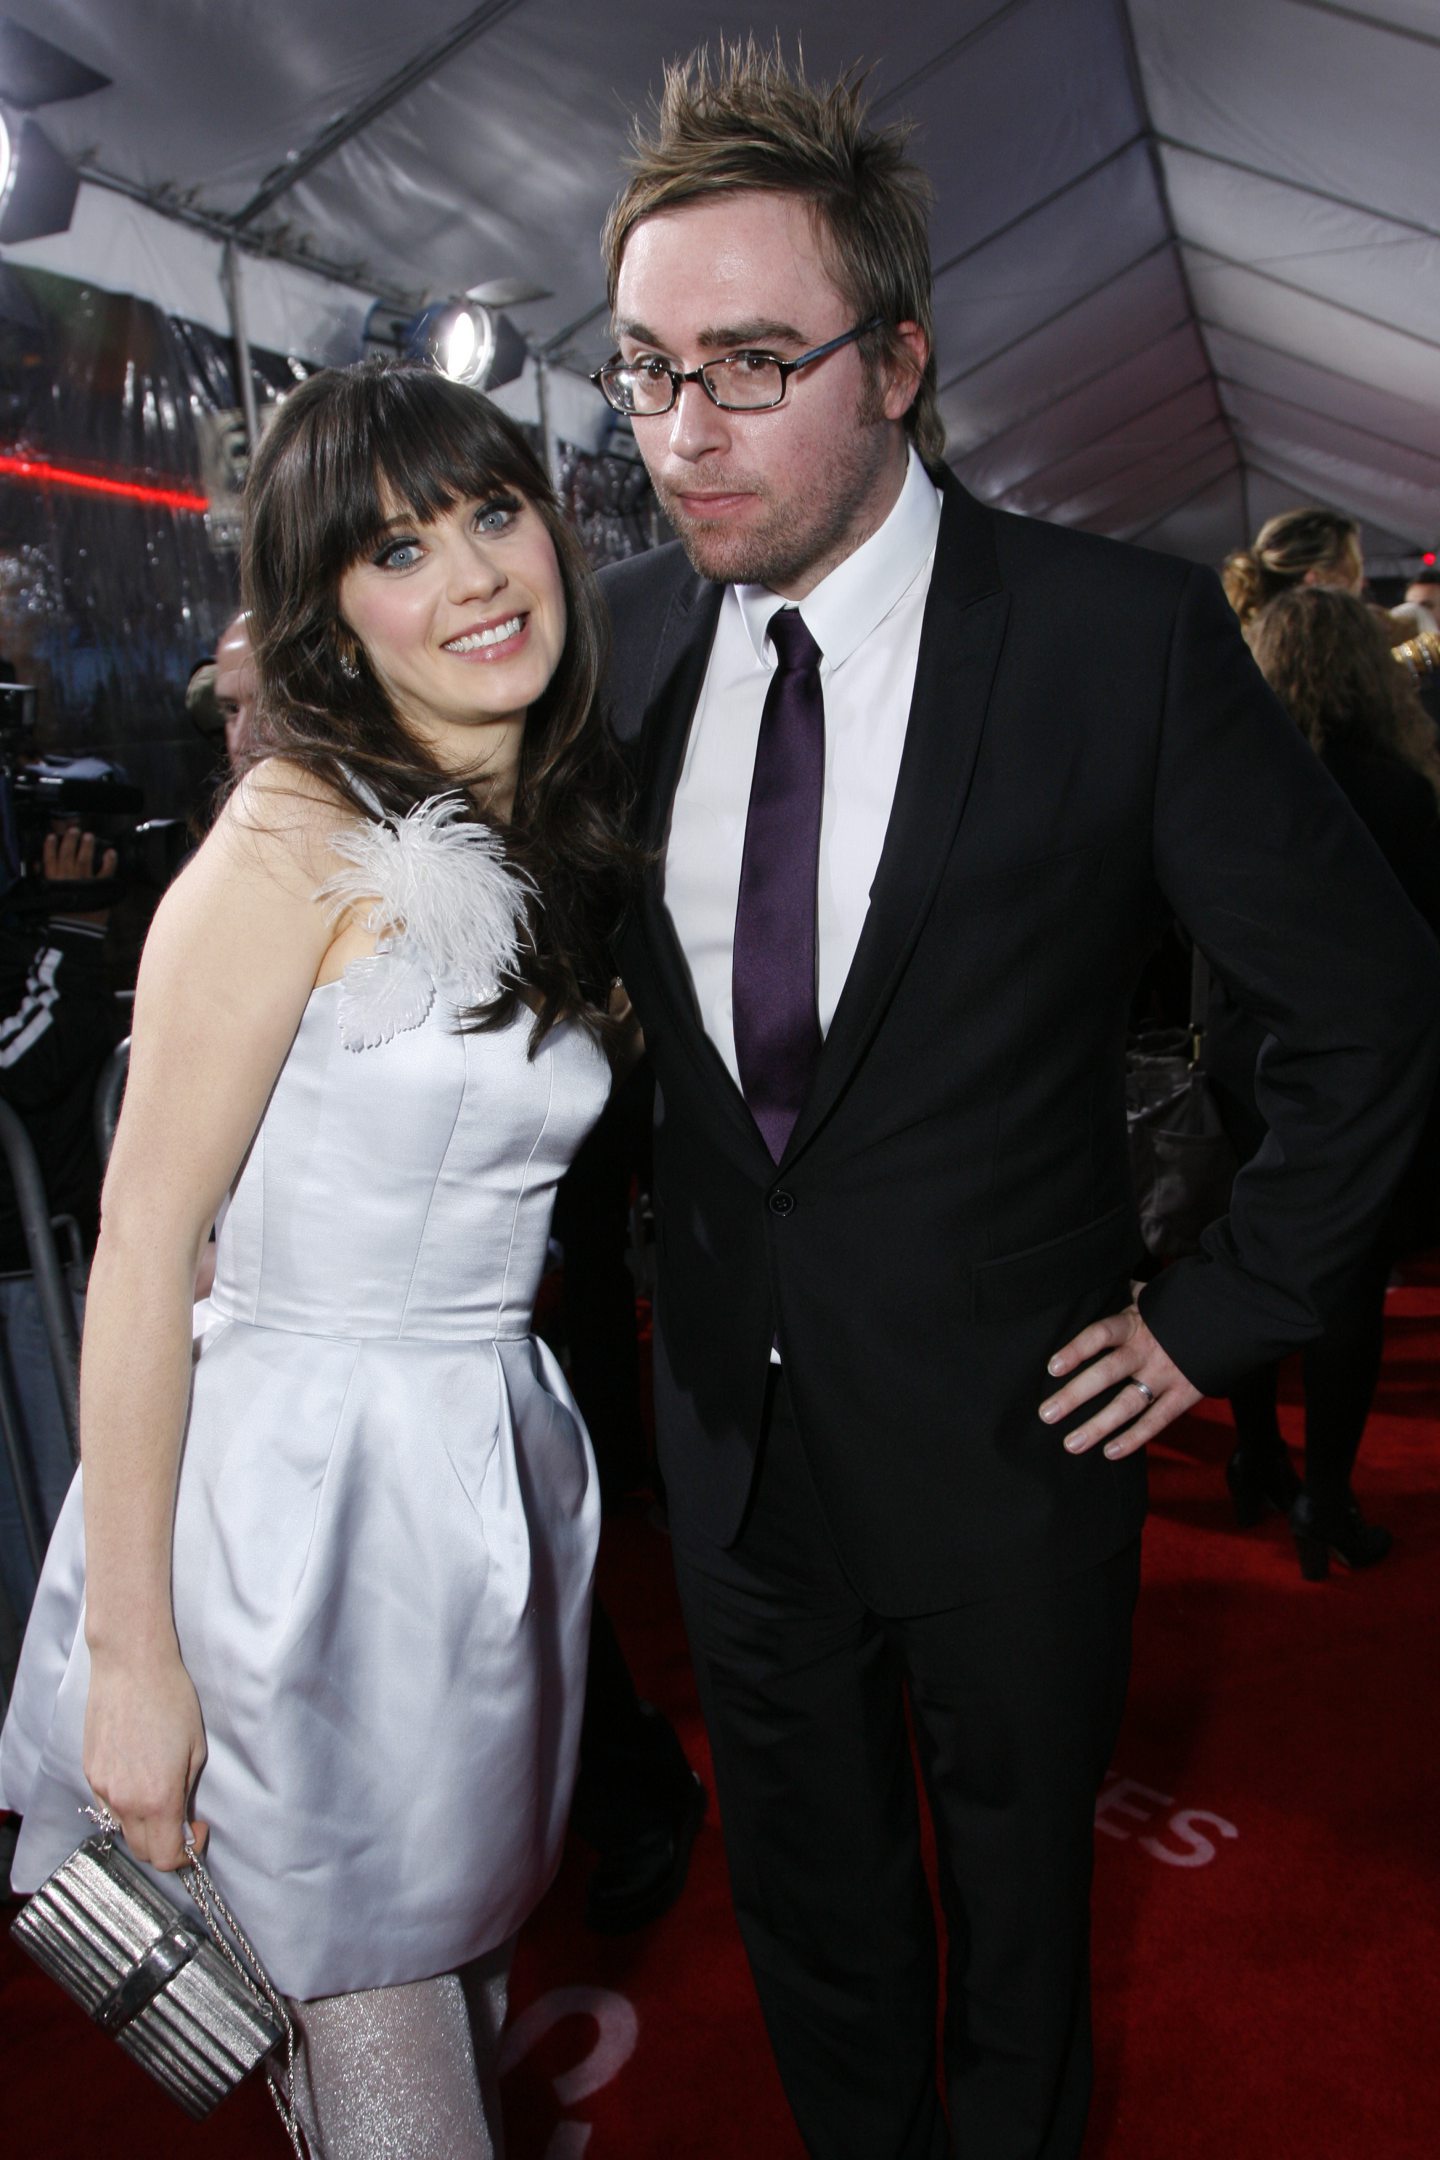 Zooey Deschanel and Danny Wallace at the premiere of Yes Man in Los Angeles. Image: Shutterstock.